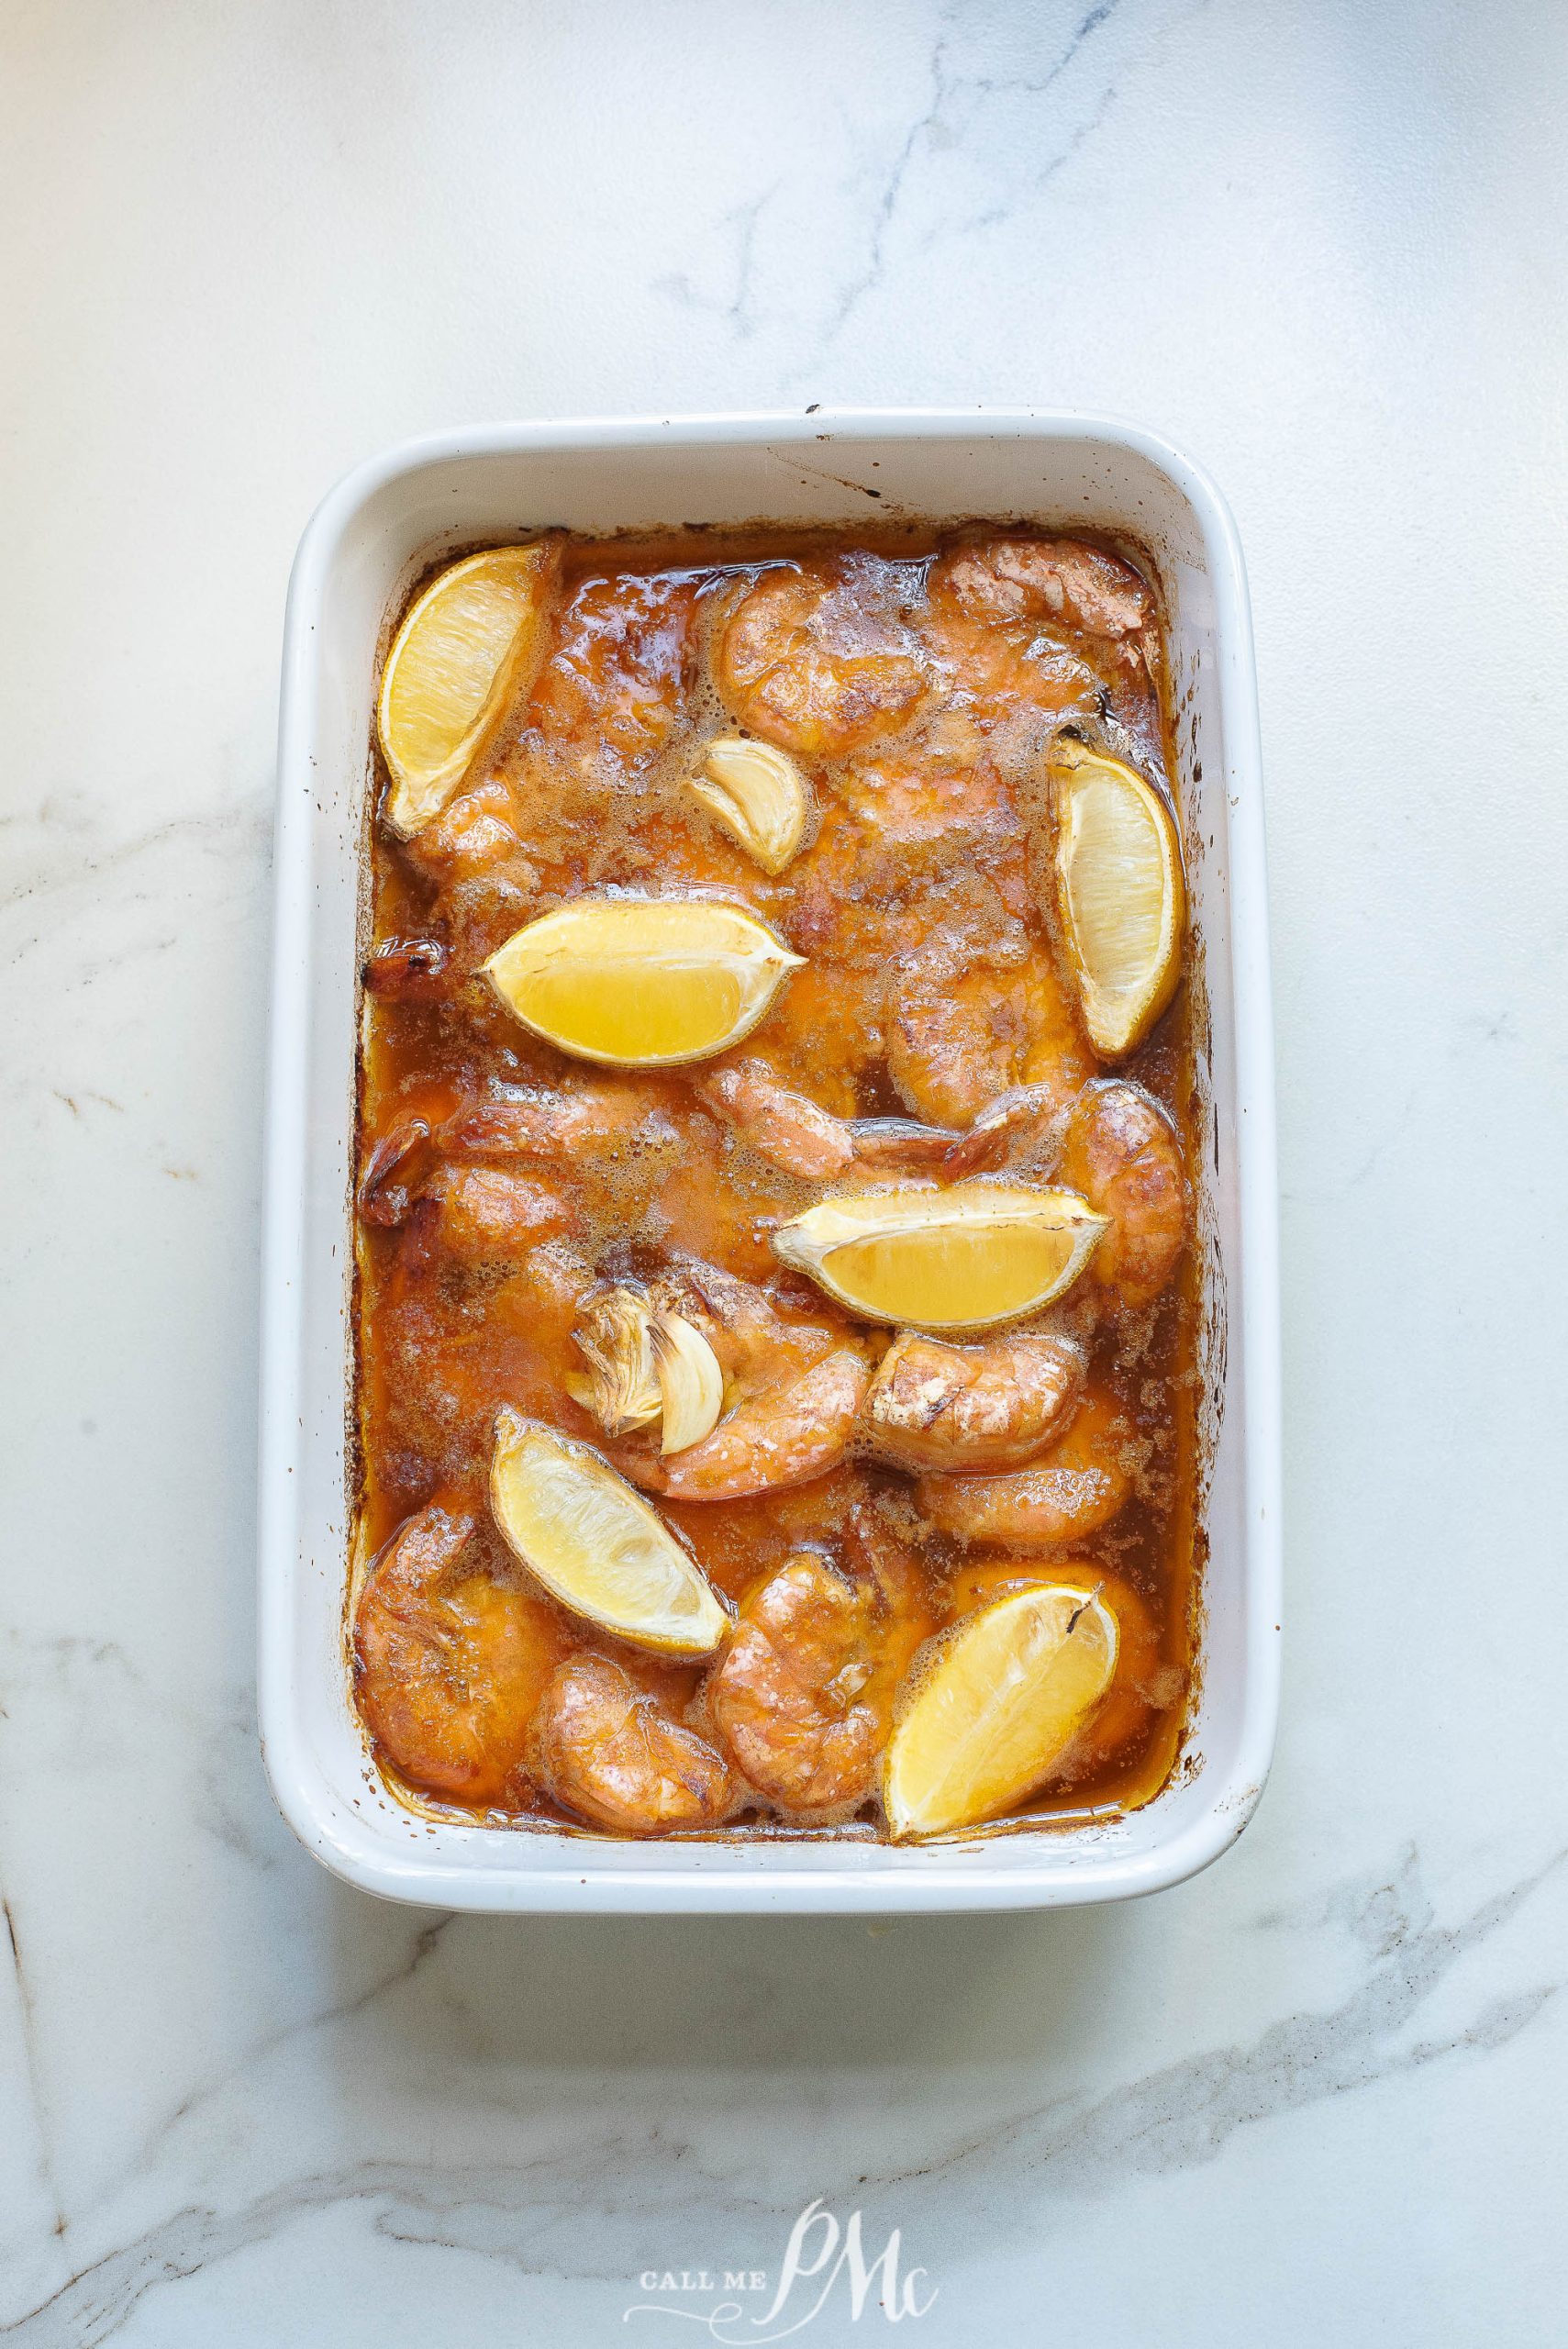 Shrimp with lemon wedges in a red sauce in a white casserole dish.